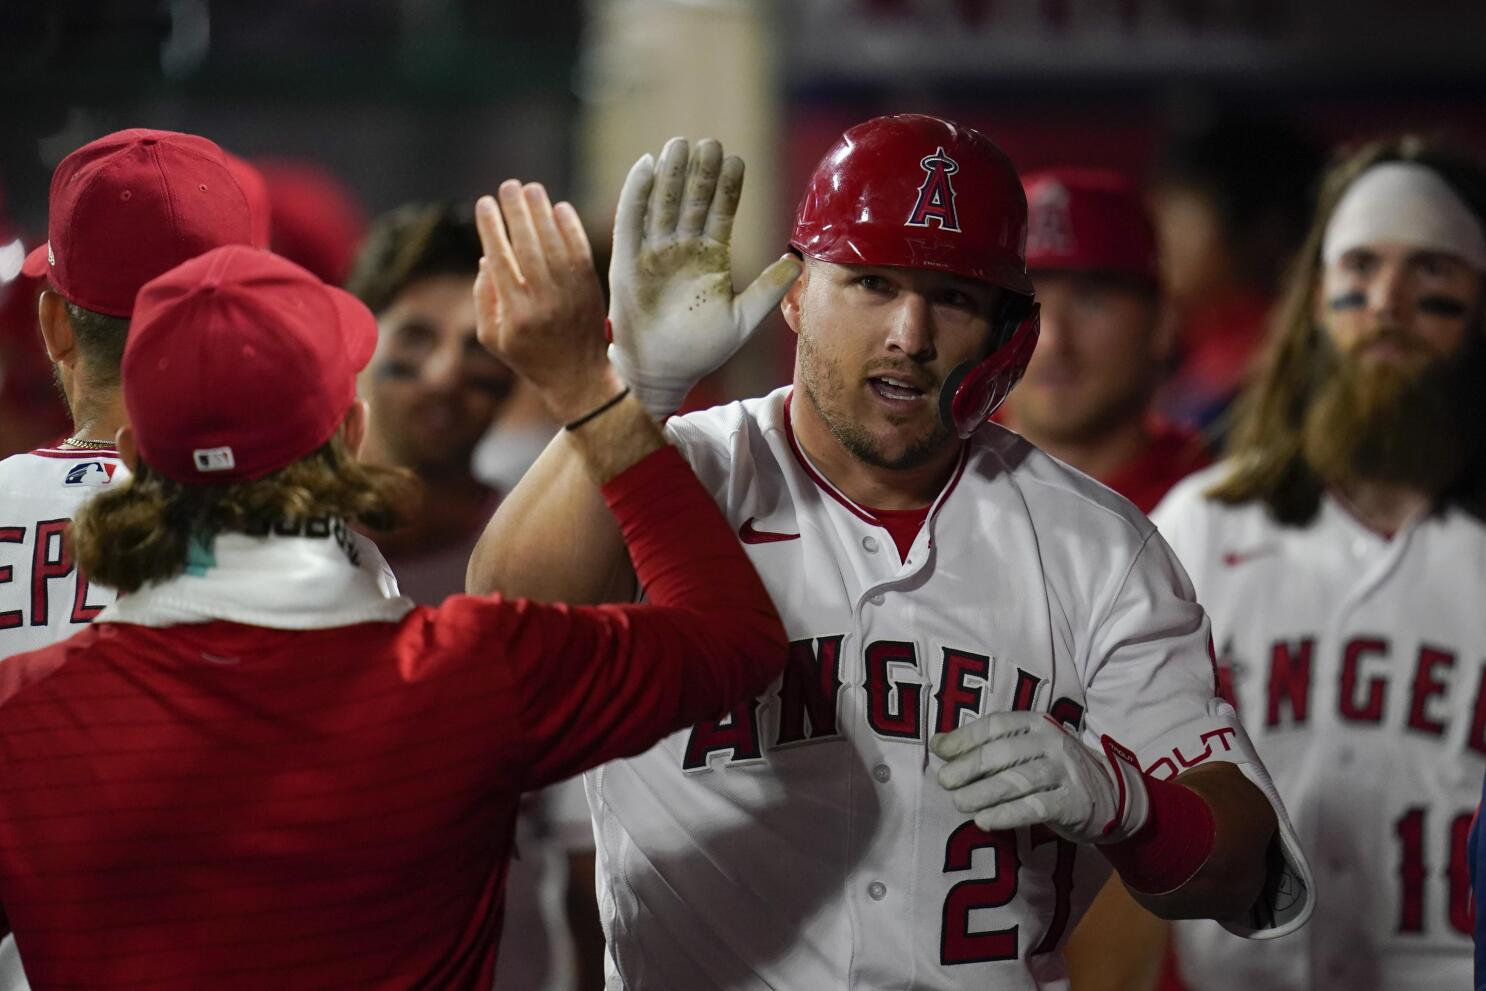 Mike Trout nearly hit by pitch in Team USA friendly against LA Angels